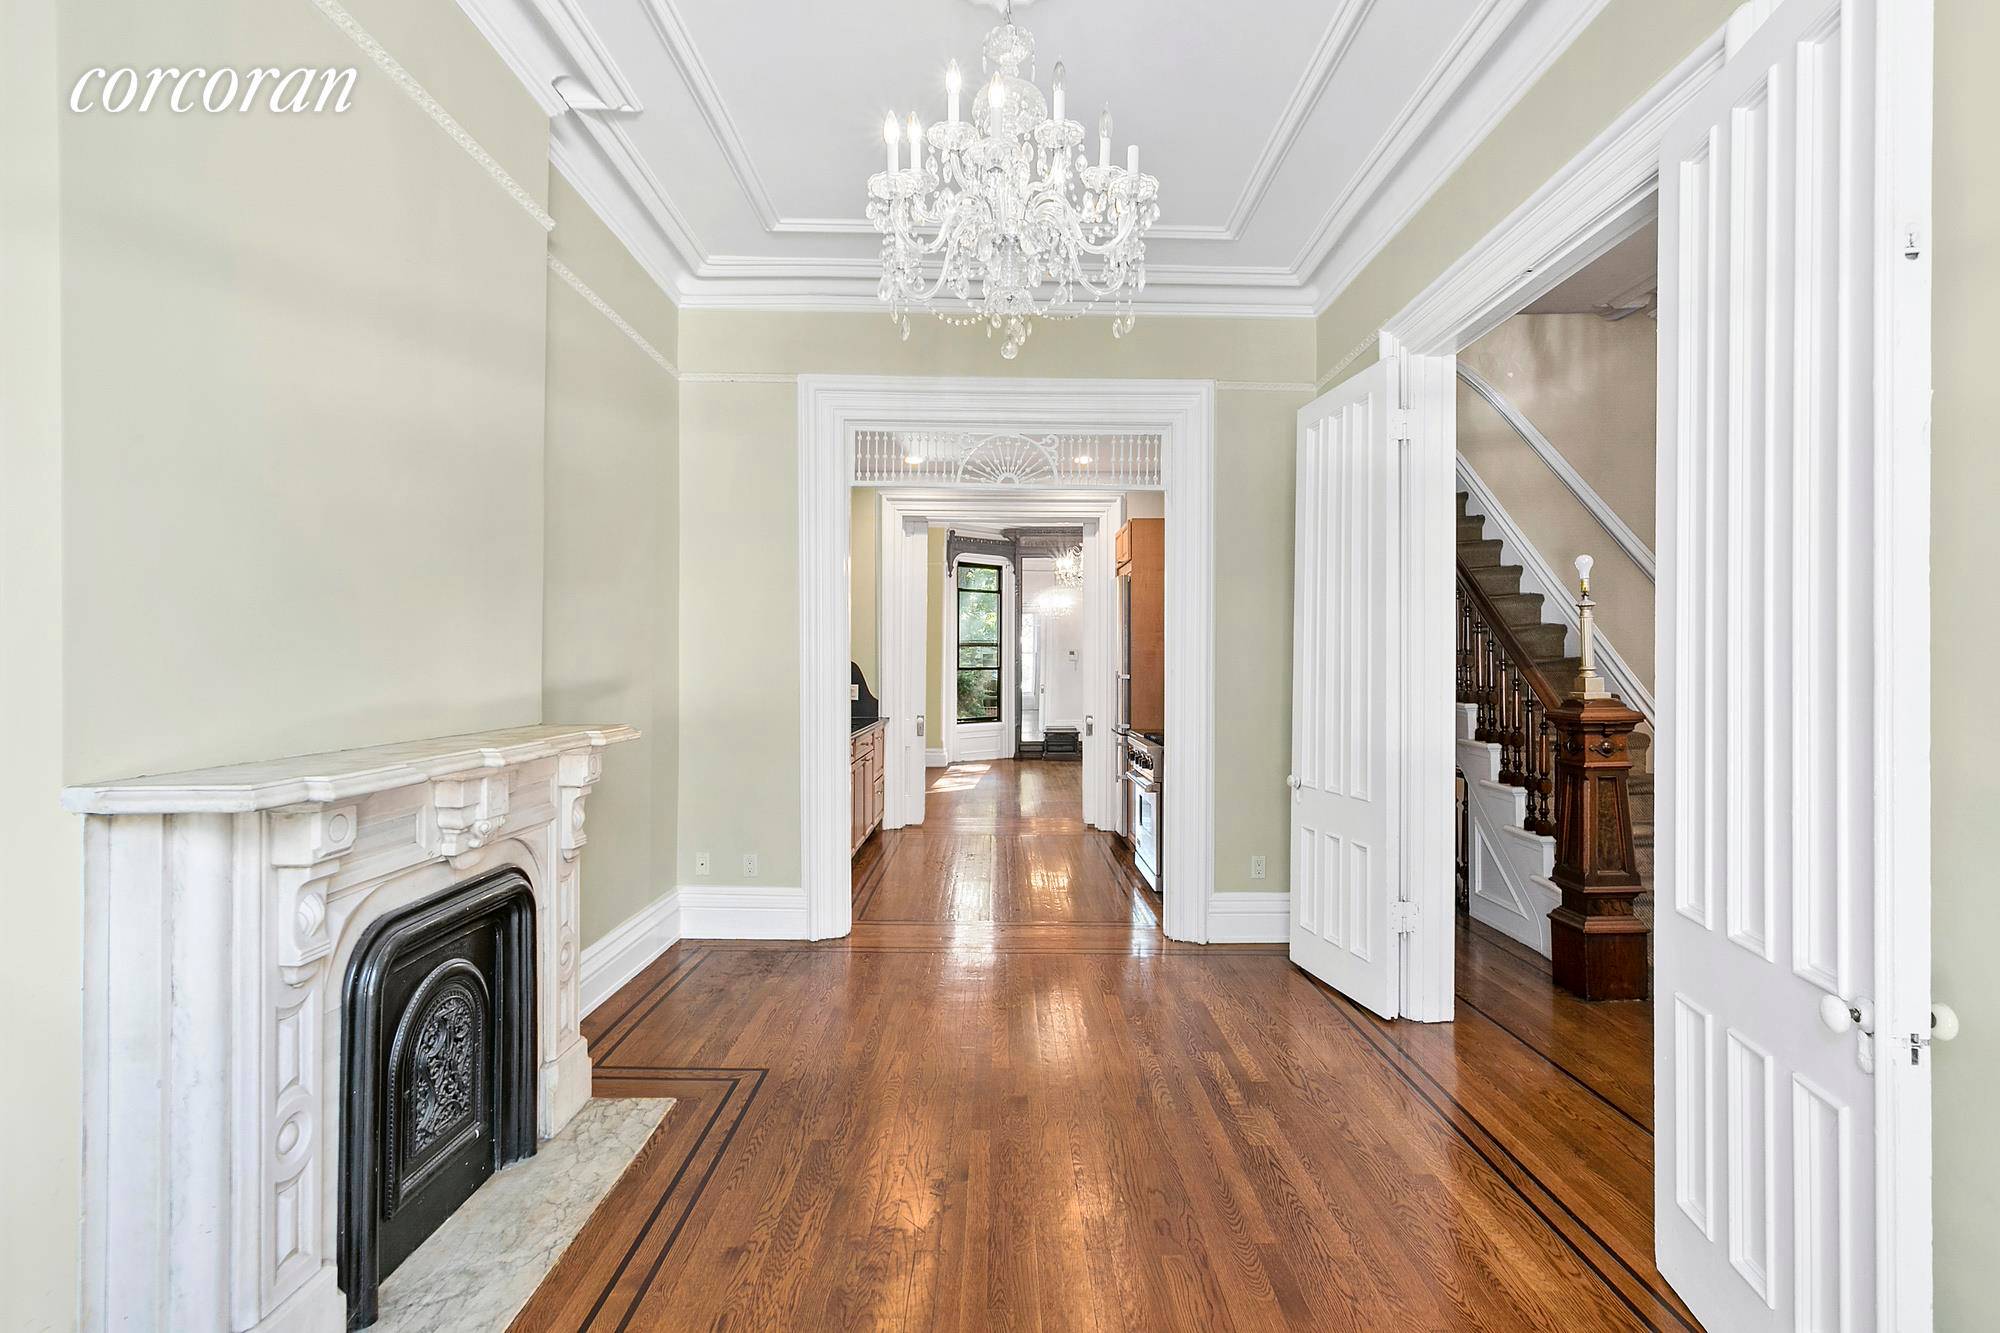 282 Vanderbilt Avenue presents a unique opportunity for end users to own a one of a kind brownstone on arguably the nicest block in all of Fort Greene.